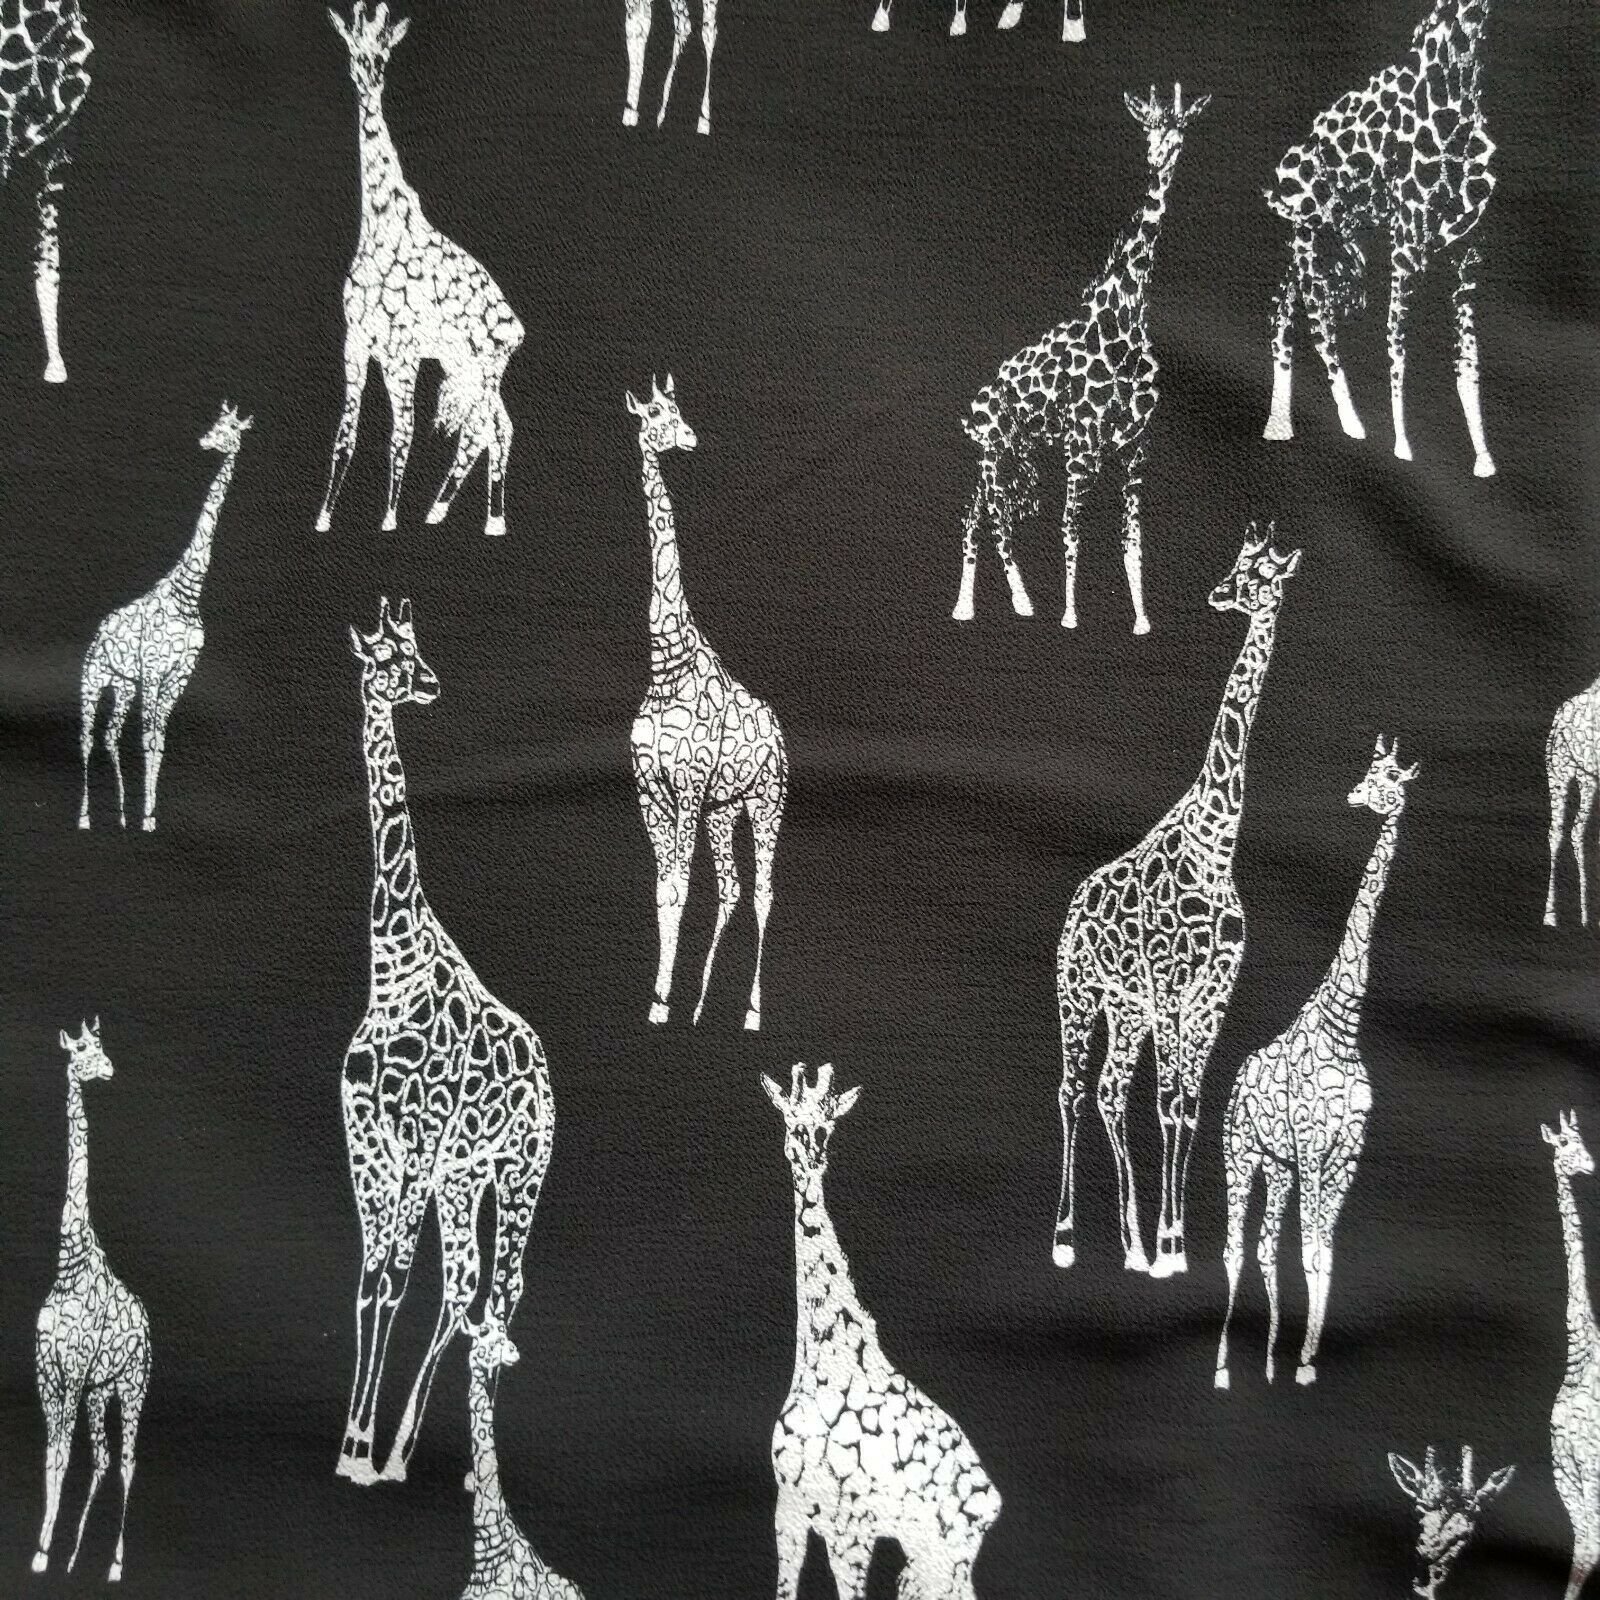 Adorable Larger Giraffes in Black/White on Crepe - So Cute! - Beautiful ...